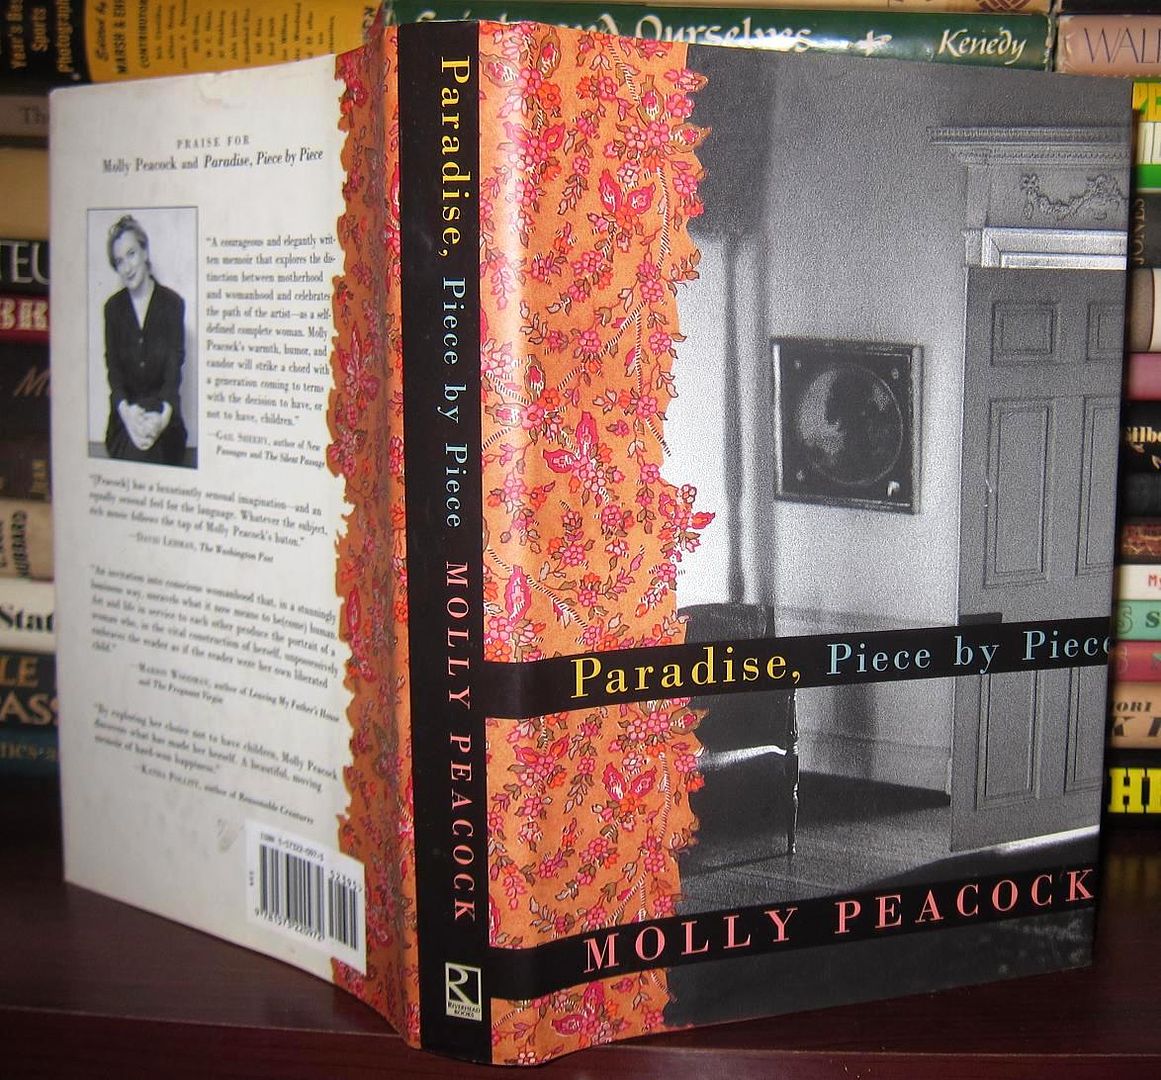 PEACOCK, MOLLY - Paradise, Piece by Piece